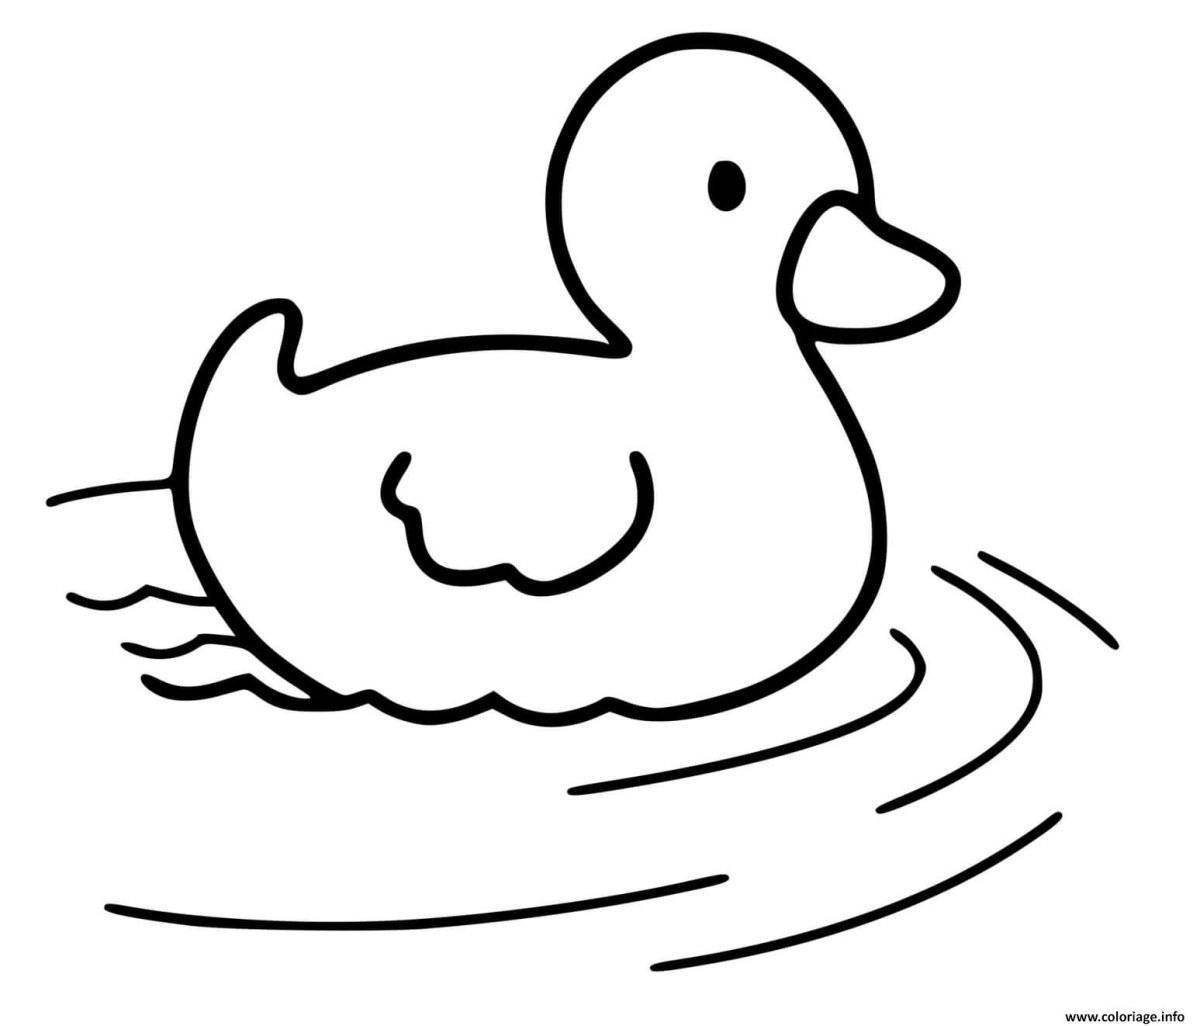 Lalafan magic duck coloring page